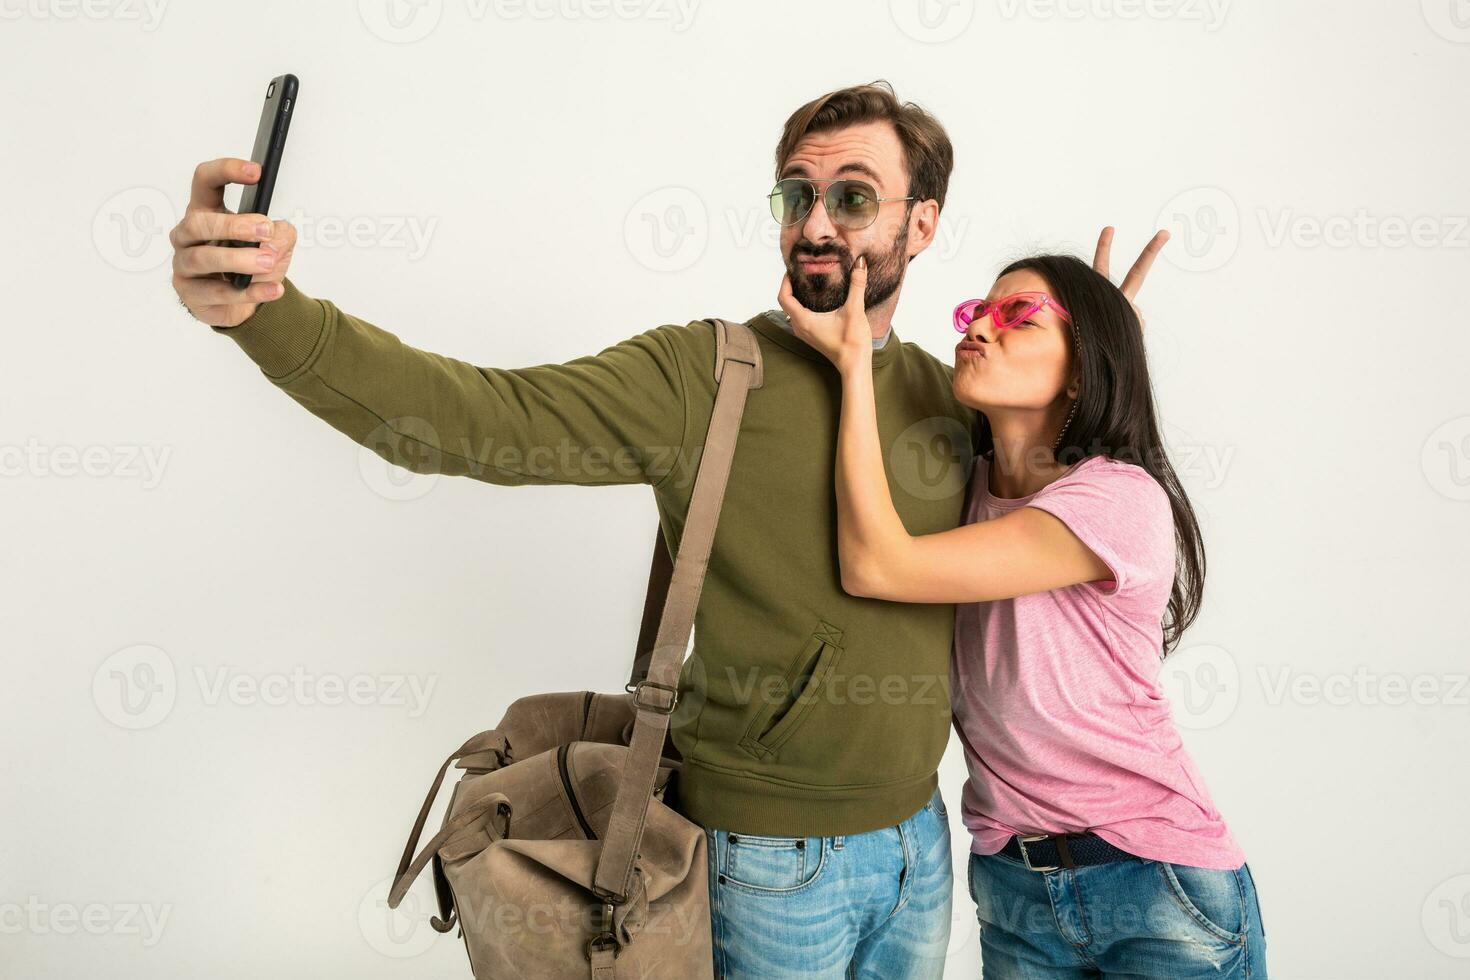 couple smiling woman and man in sweatshirt with travel bag photo